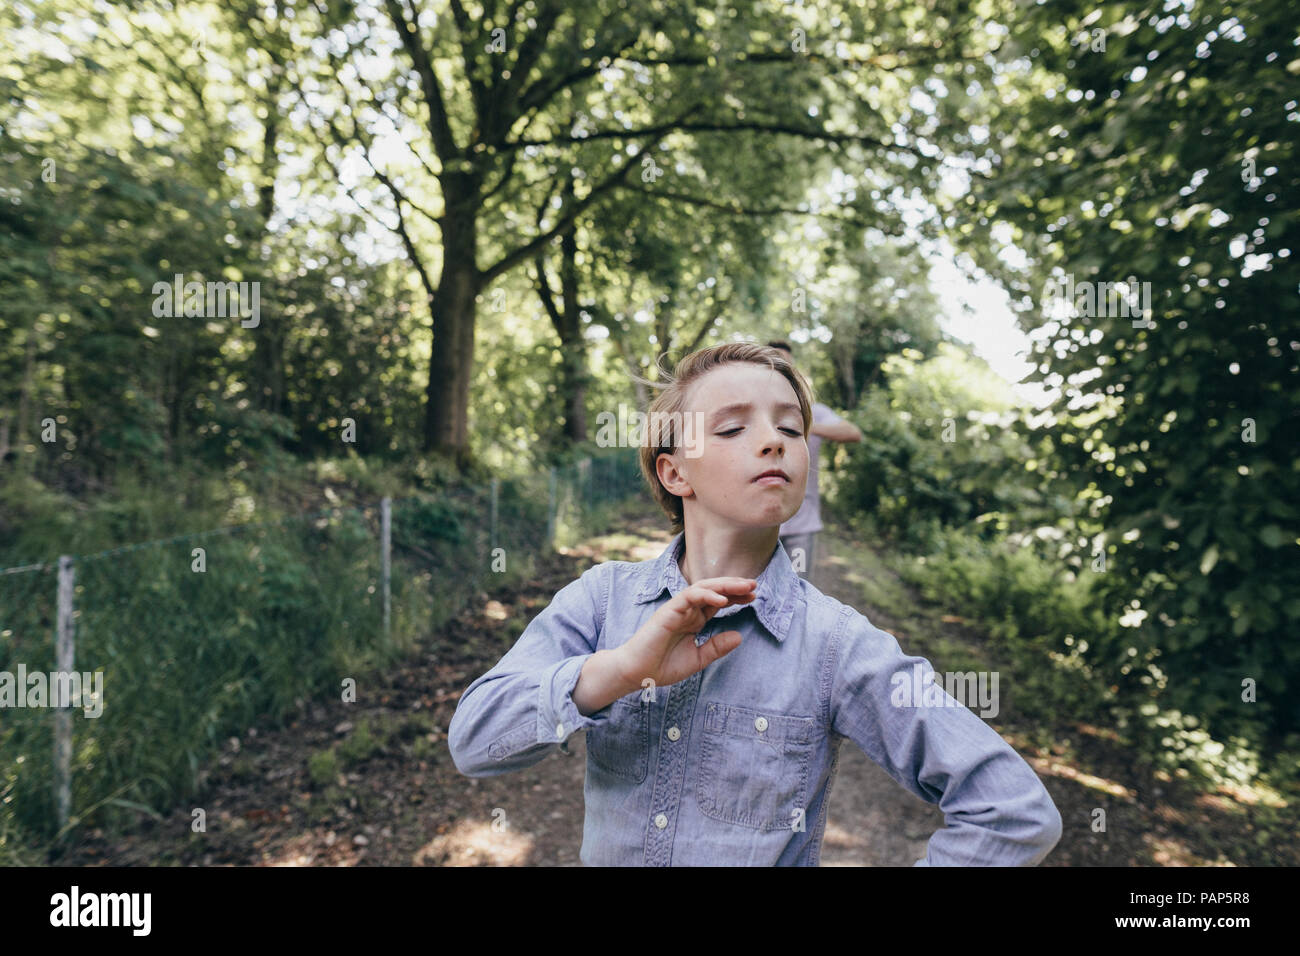 Boy posing on forest path Stock Photo